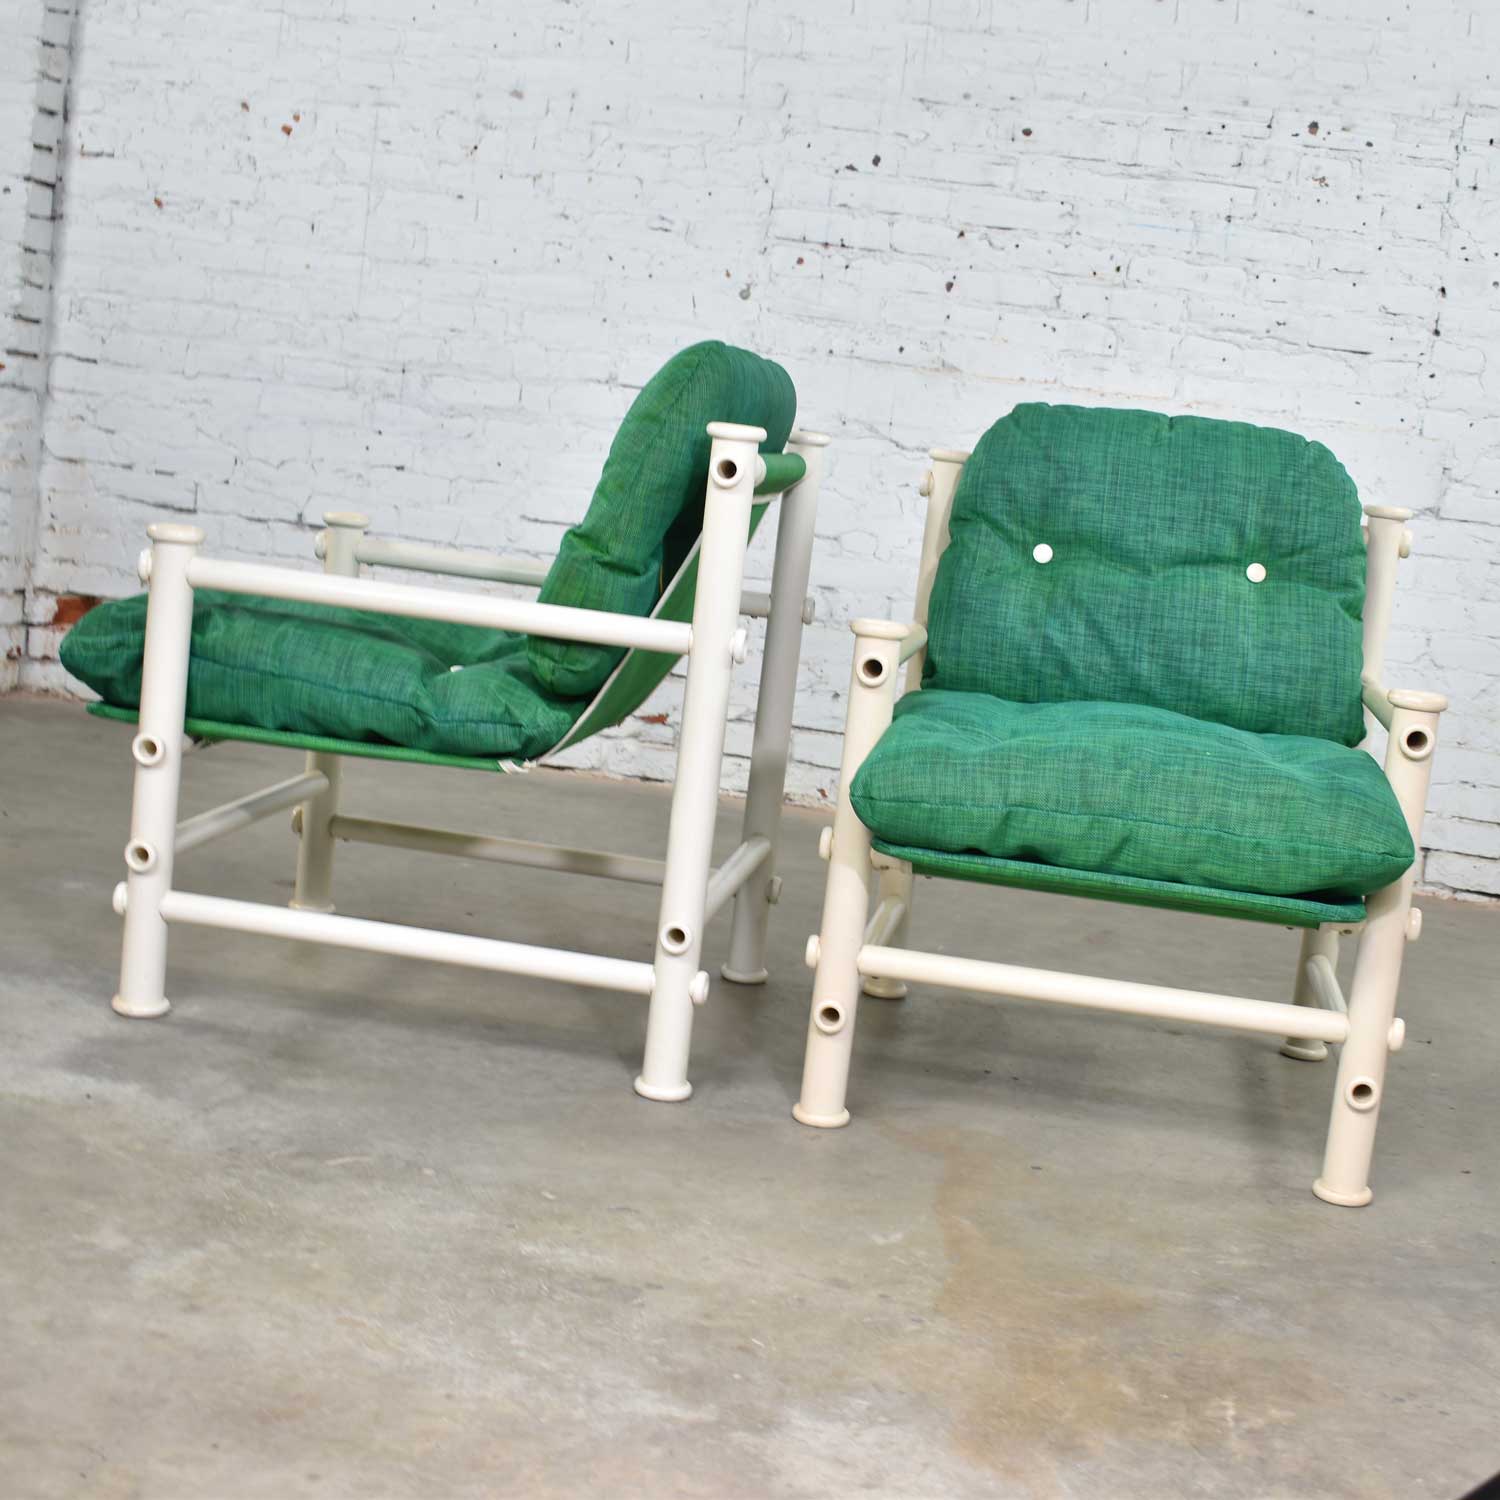 Pair of Landes PVC Outdoor Idyllwild Lounge Chairs w/ Green Mesh Upholstery by Jerry Johnson